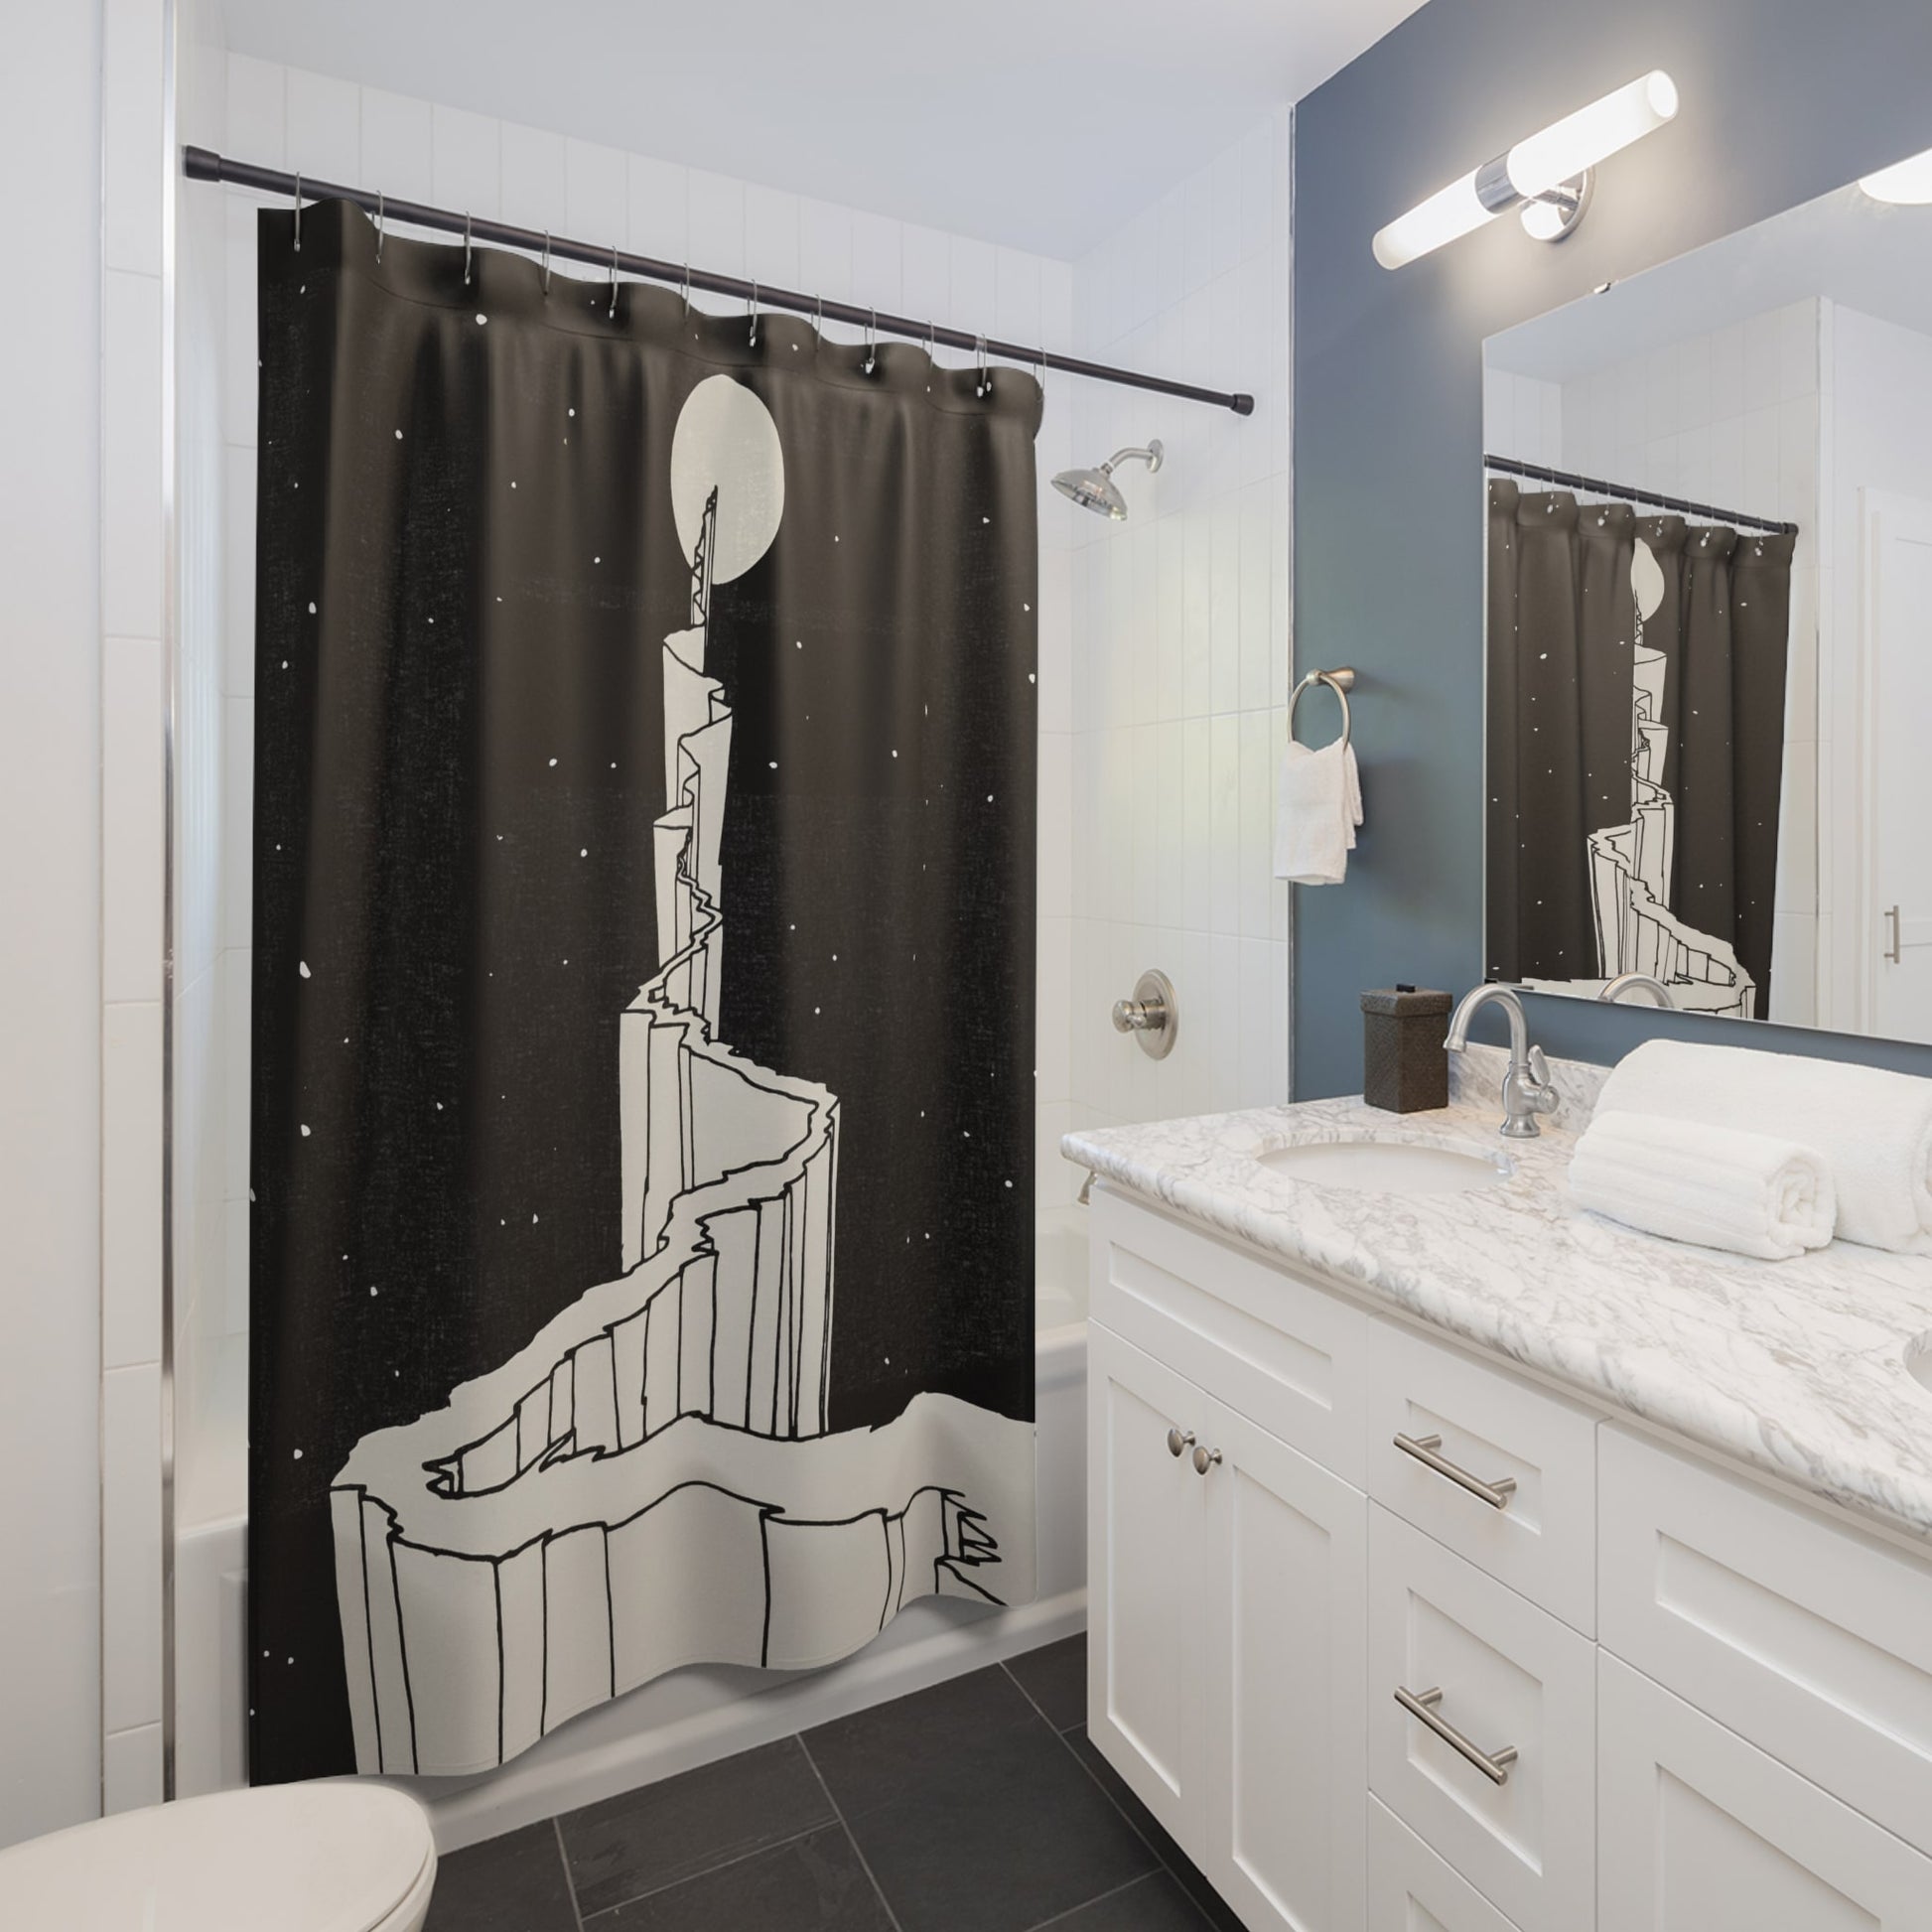 Black and White Fantasy Shower Curtain Best Bathroom Decorating Ideas for Science Decor